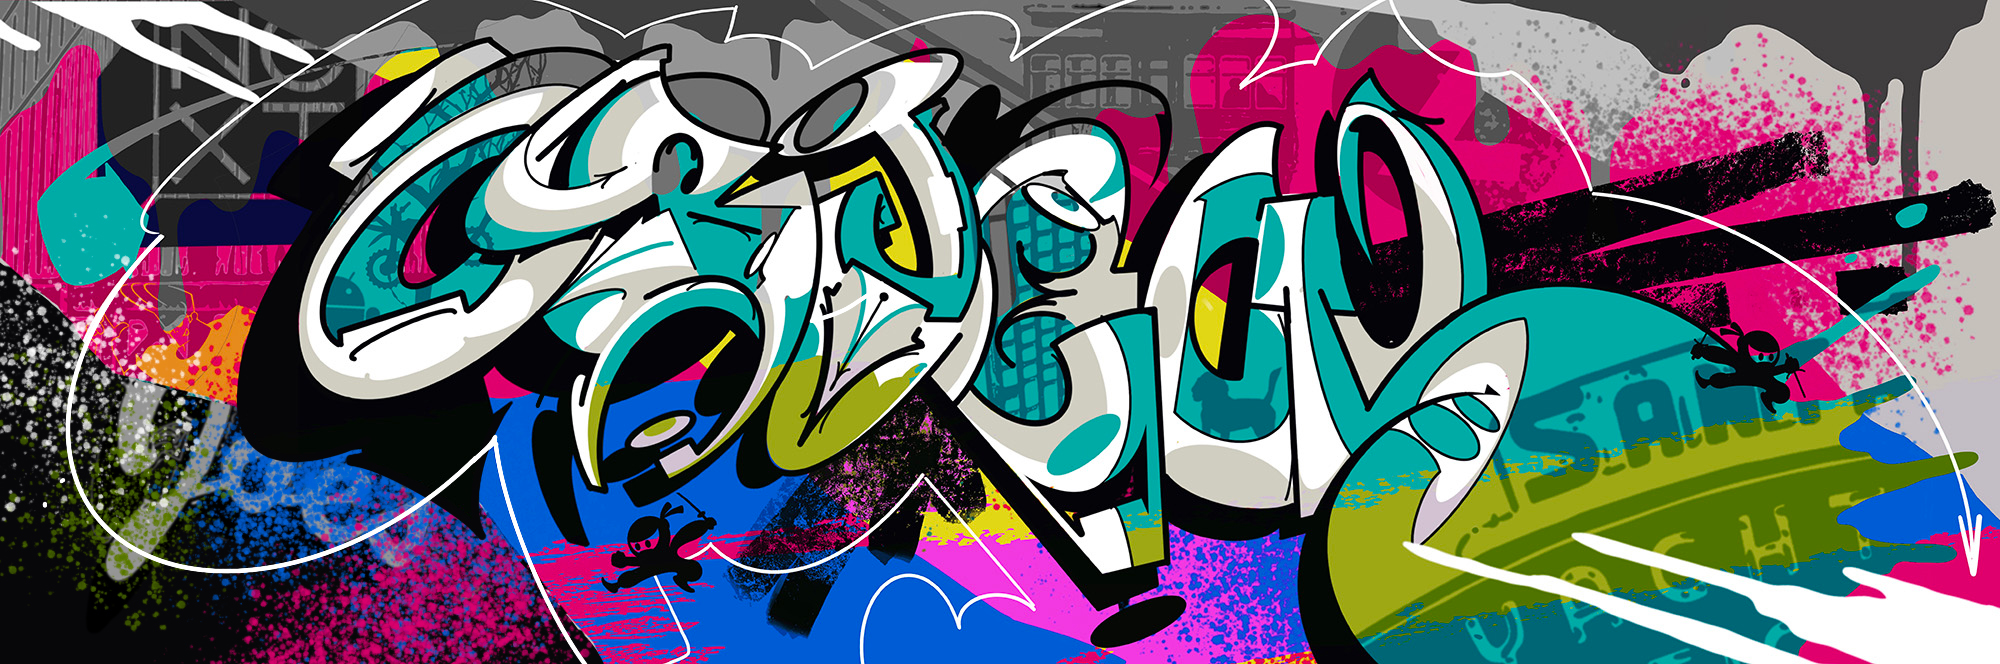 Colorful graffiti-style artwork with abstract shapes and splashes of paint